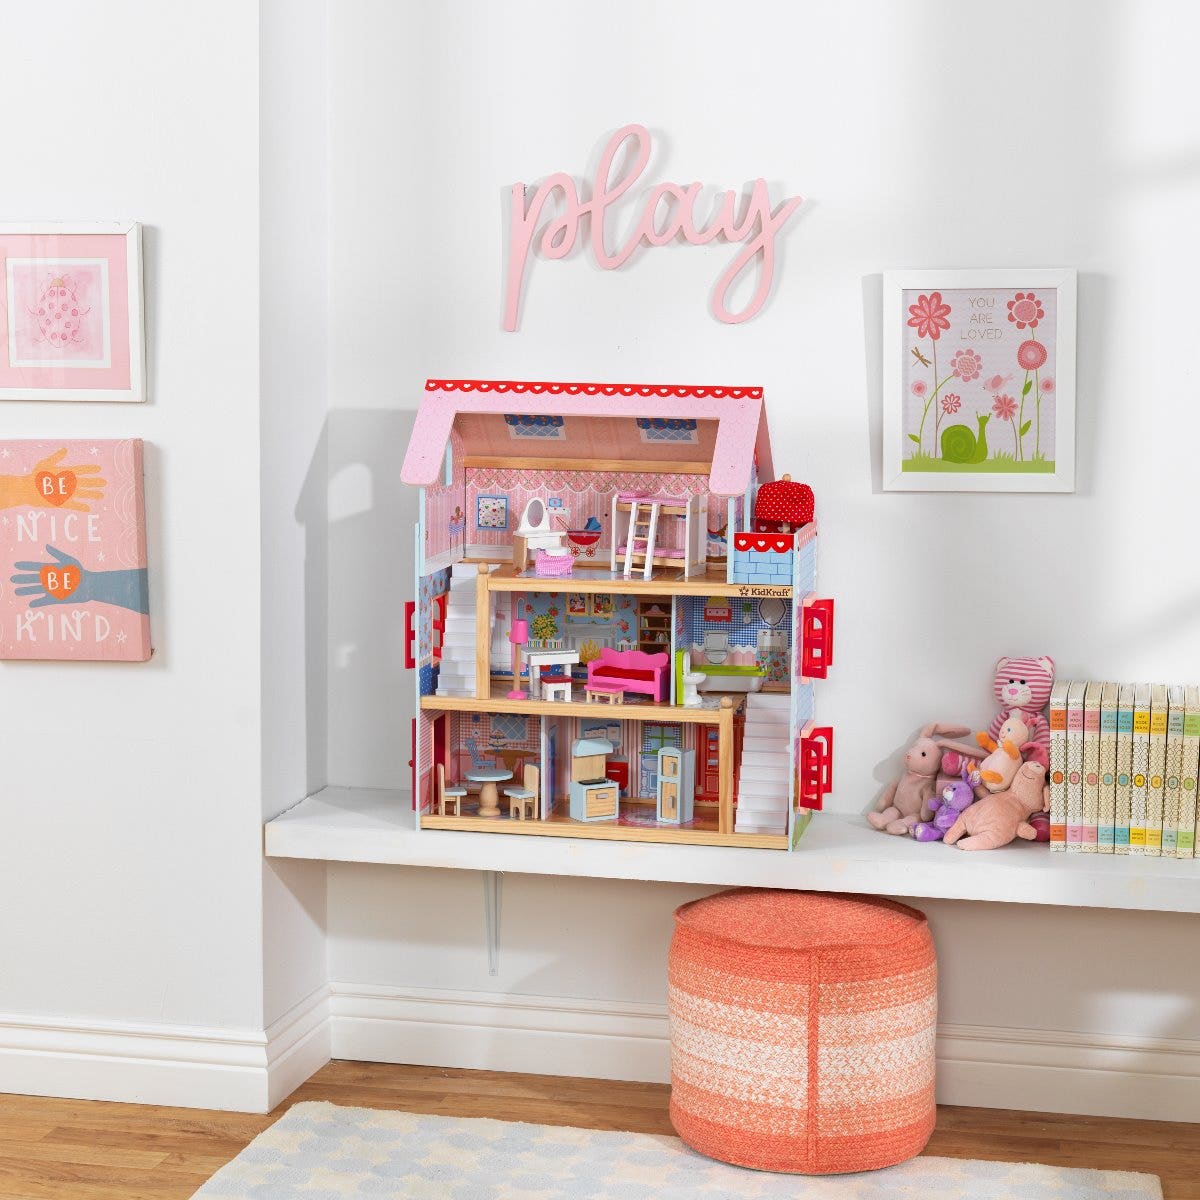 Extra-Cheerful Décor: The design of this dollhouse is cheery, super-sweet and homey. Ginghams, florals and a bright color scheme give it a country chic vibe that makes everyone feel welcome.